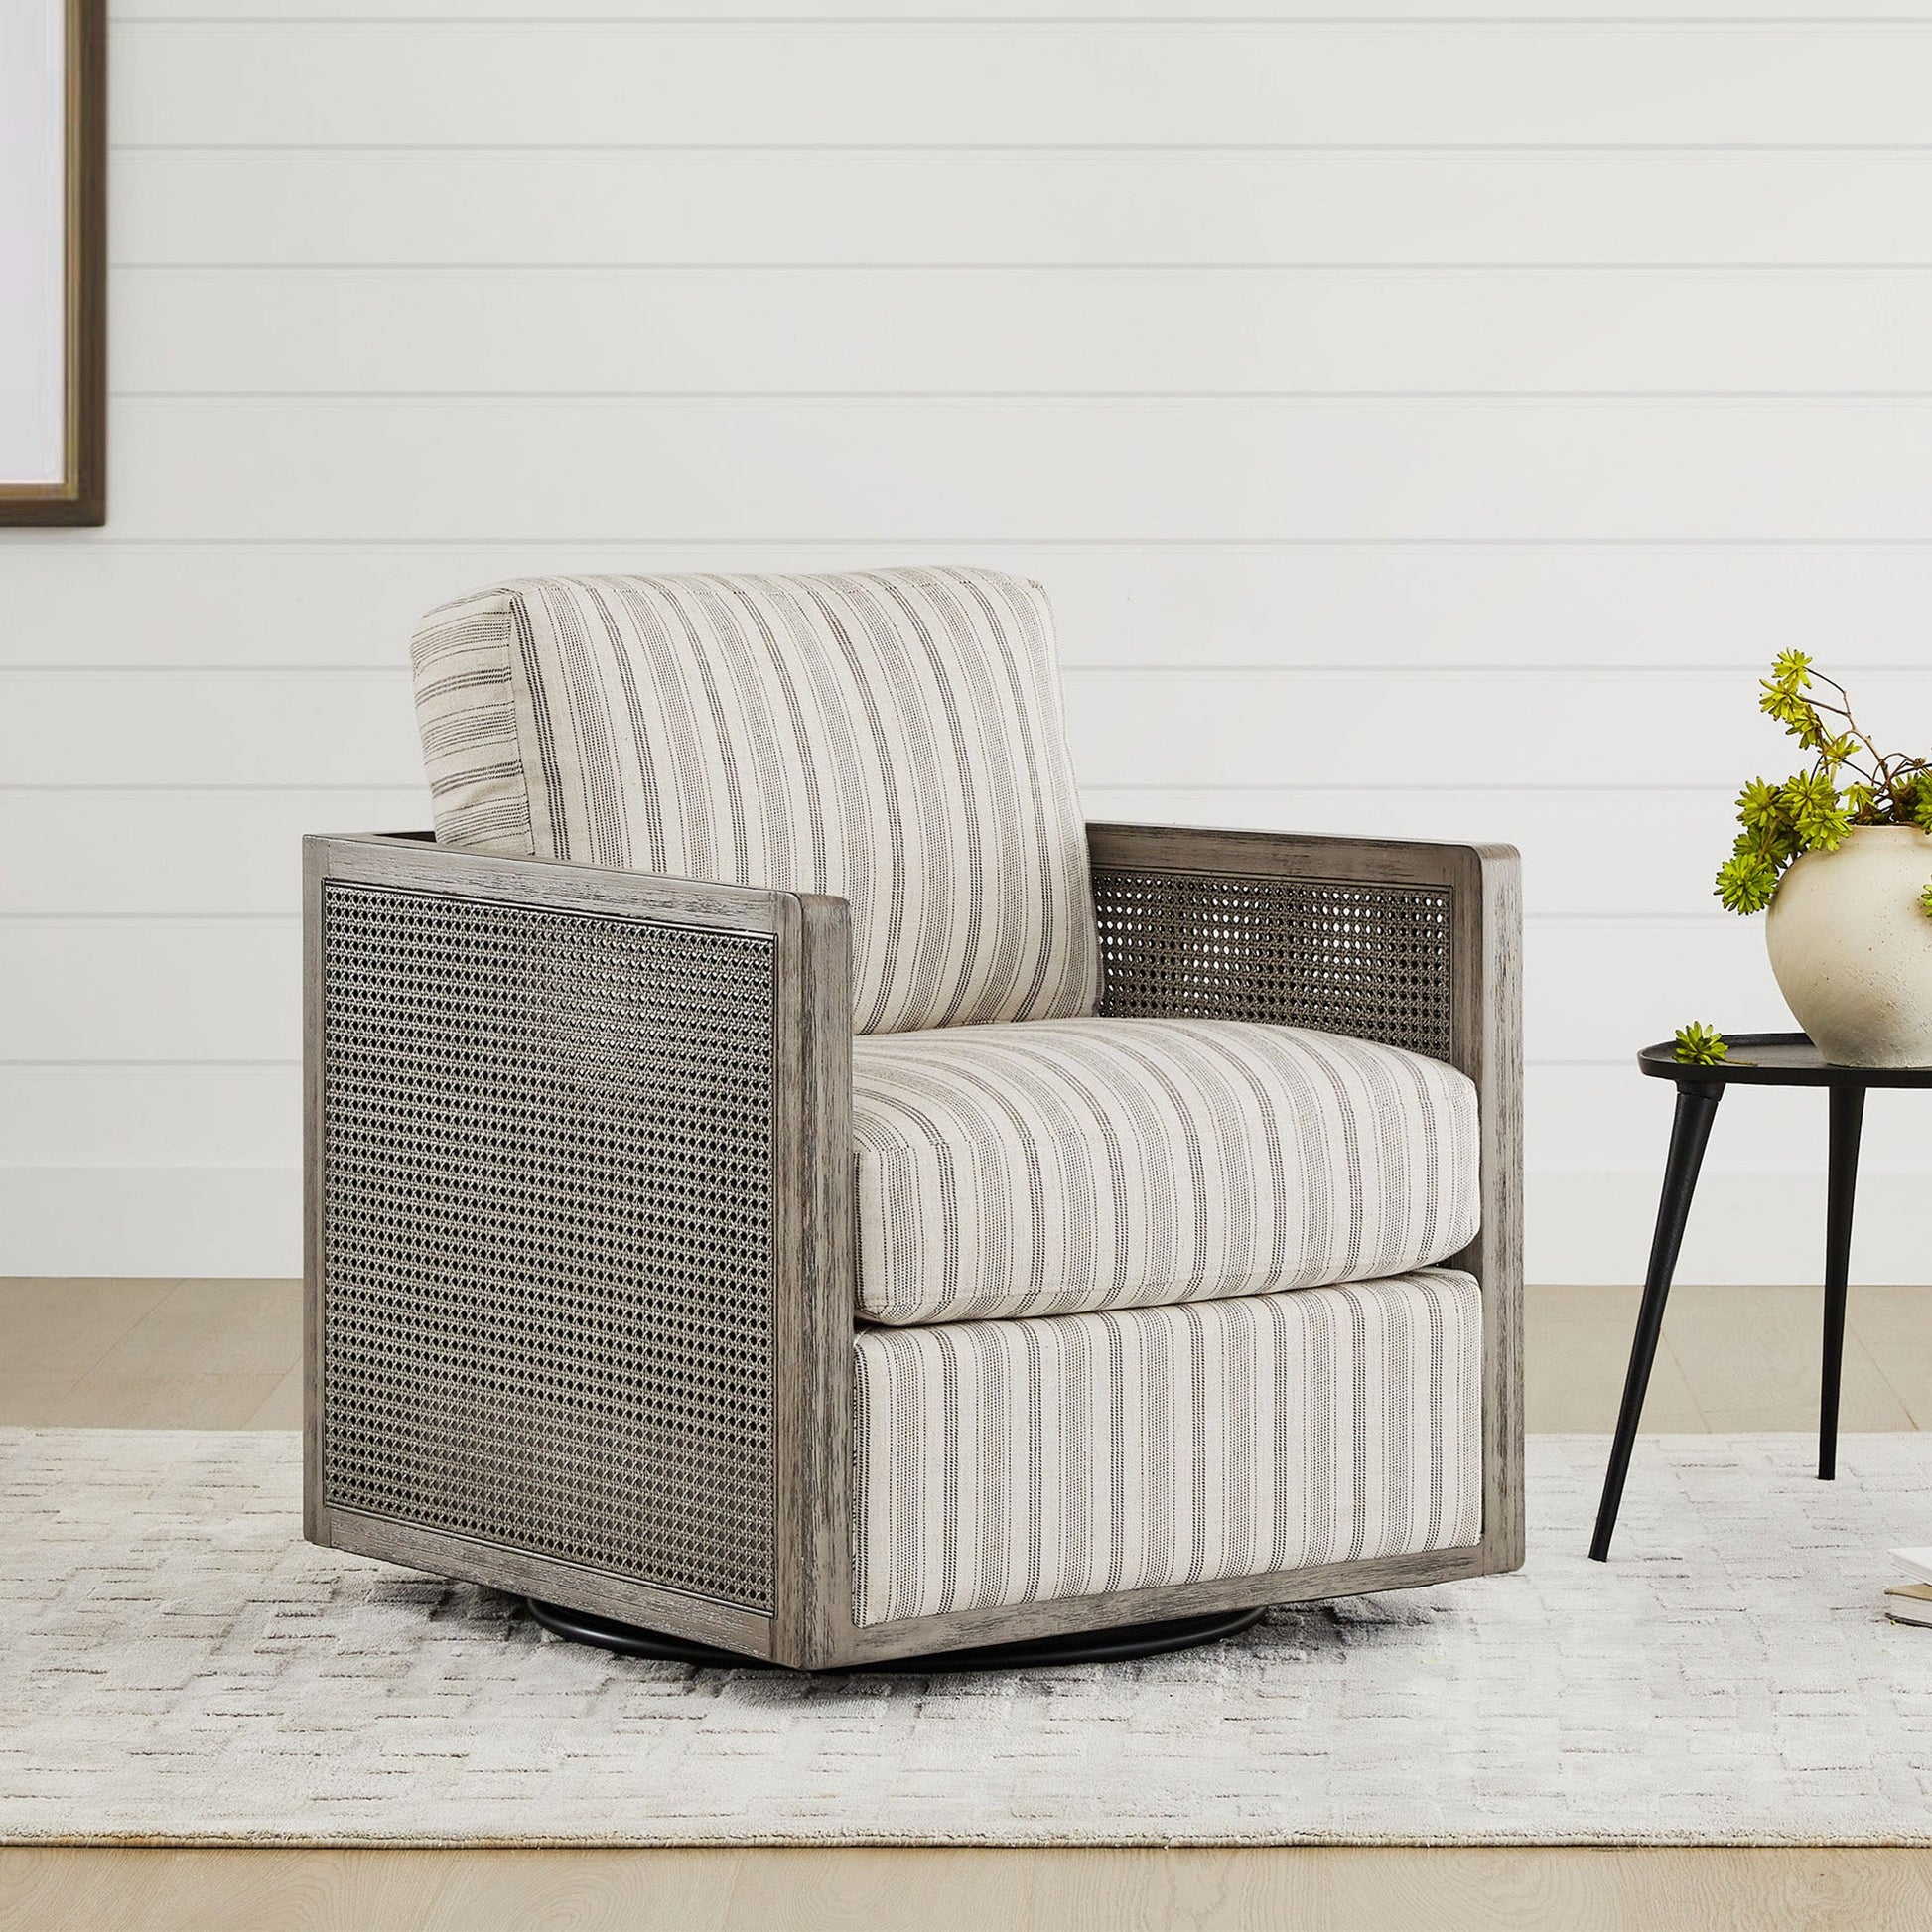 CHITA LIVING-Milly Classic Cane Swivel Armchair-Accent Chair-Natural-Stripes-